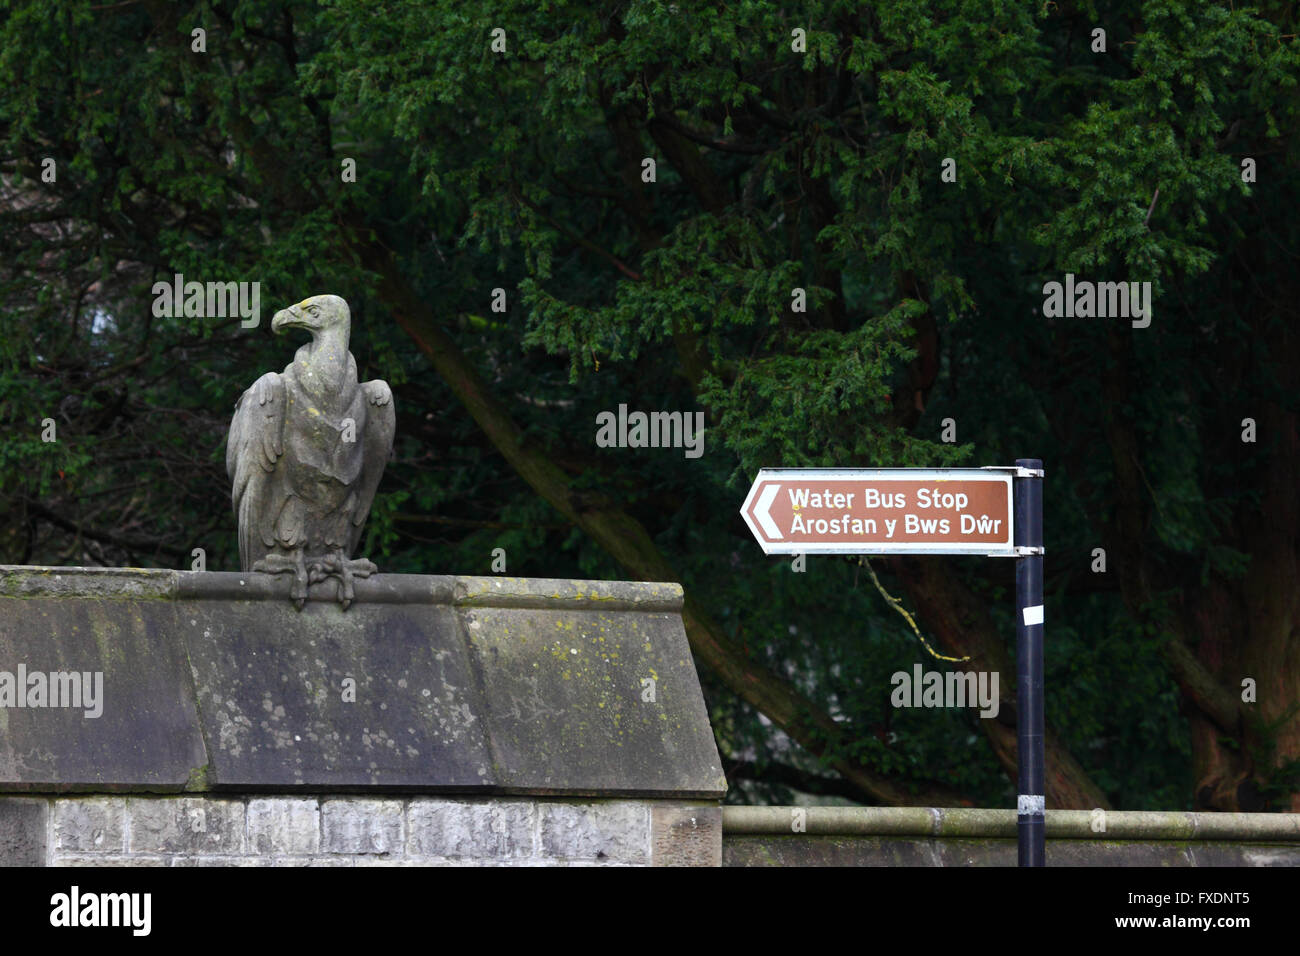 Stone vulture sculpture on Animal Wall and sign to water bus stop, Cardiff, South Glamorgan, Wales, United Kingdom Stock Photo